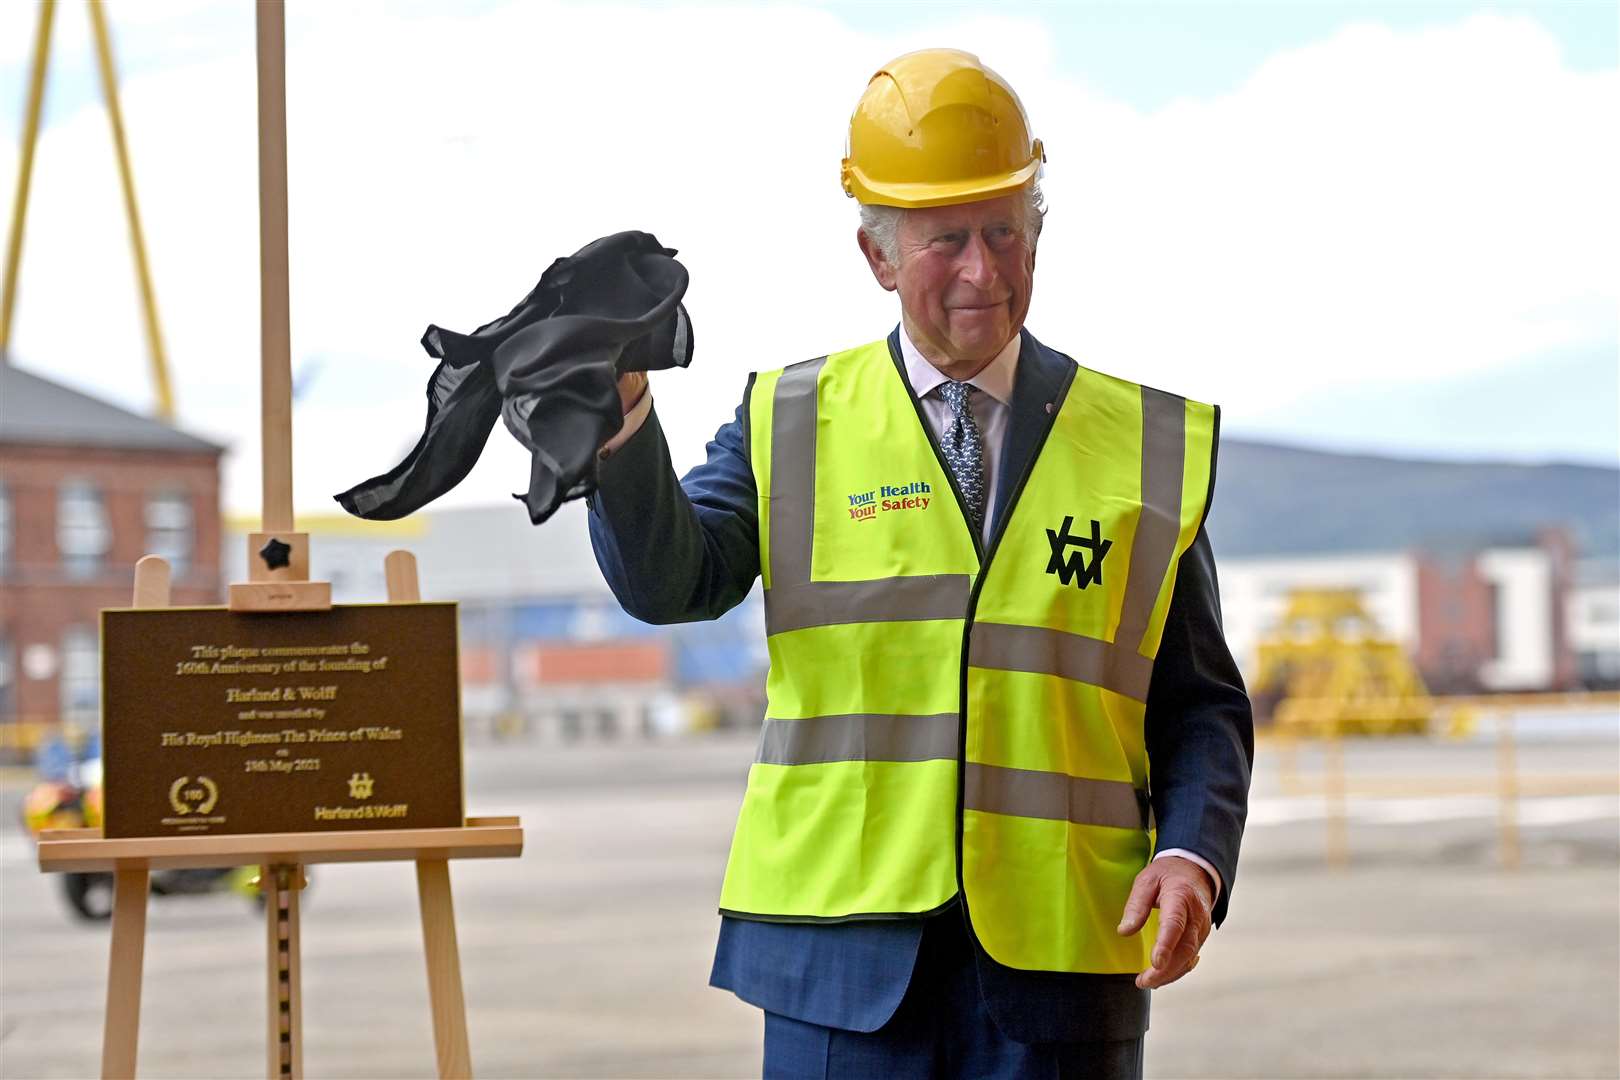 The Prince of Wales unveils a commemorative plaque during a visit to Harland & Wolff at Queen’s Island, Belfast (Samir Hussein/PA)